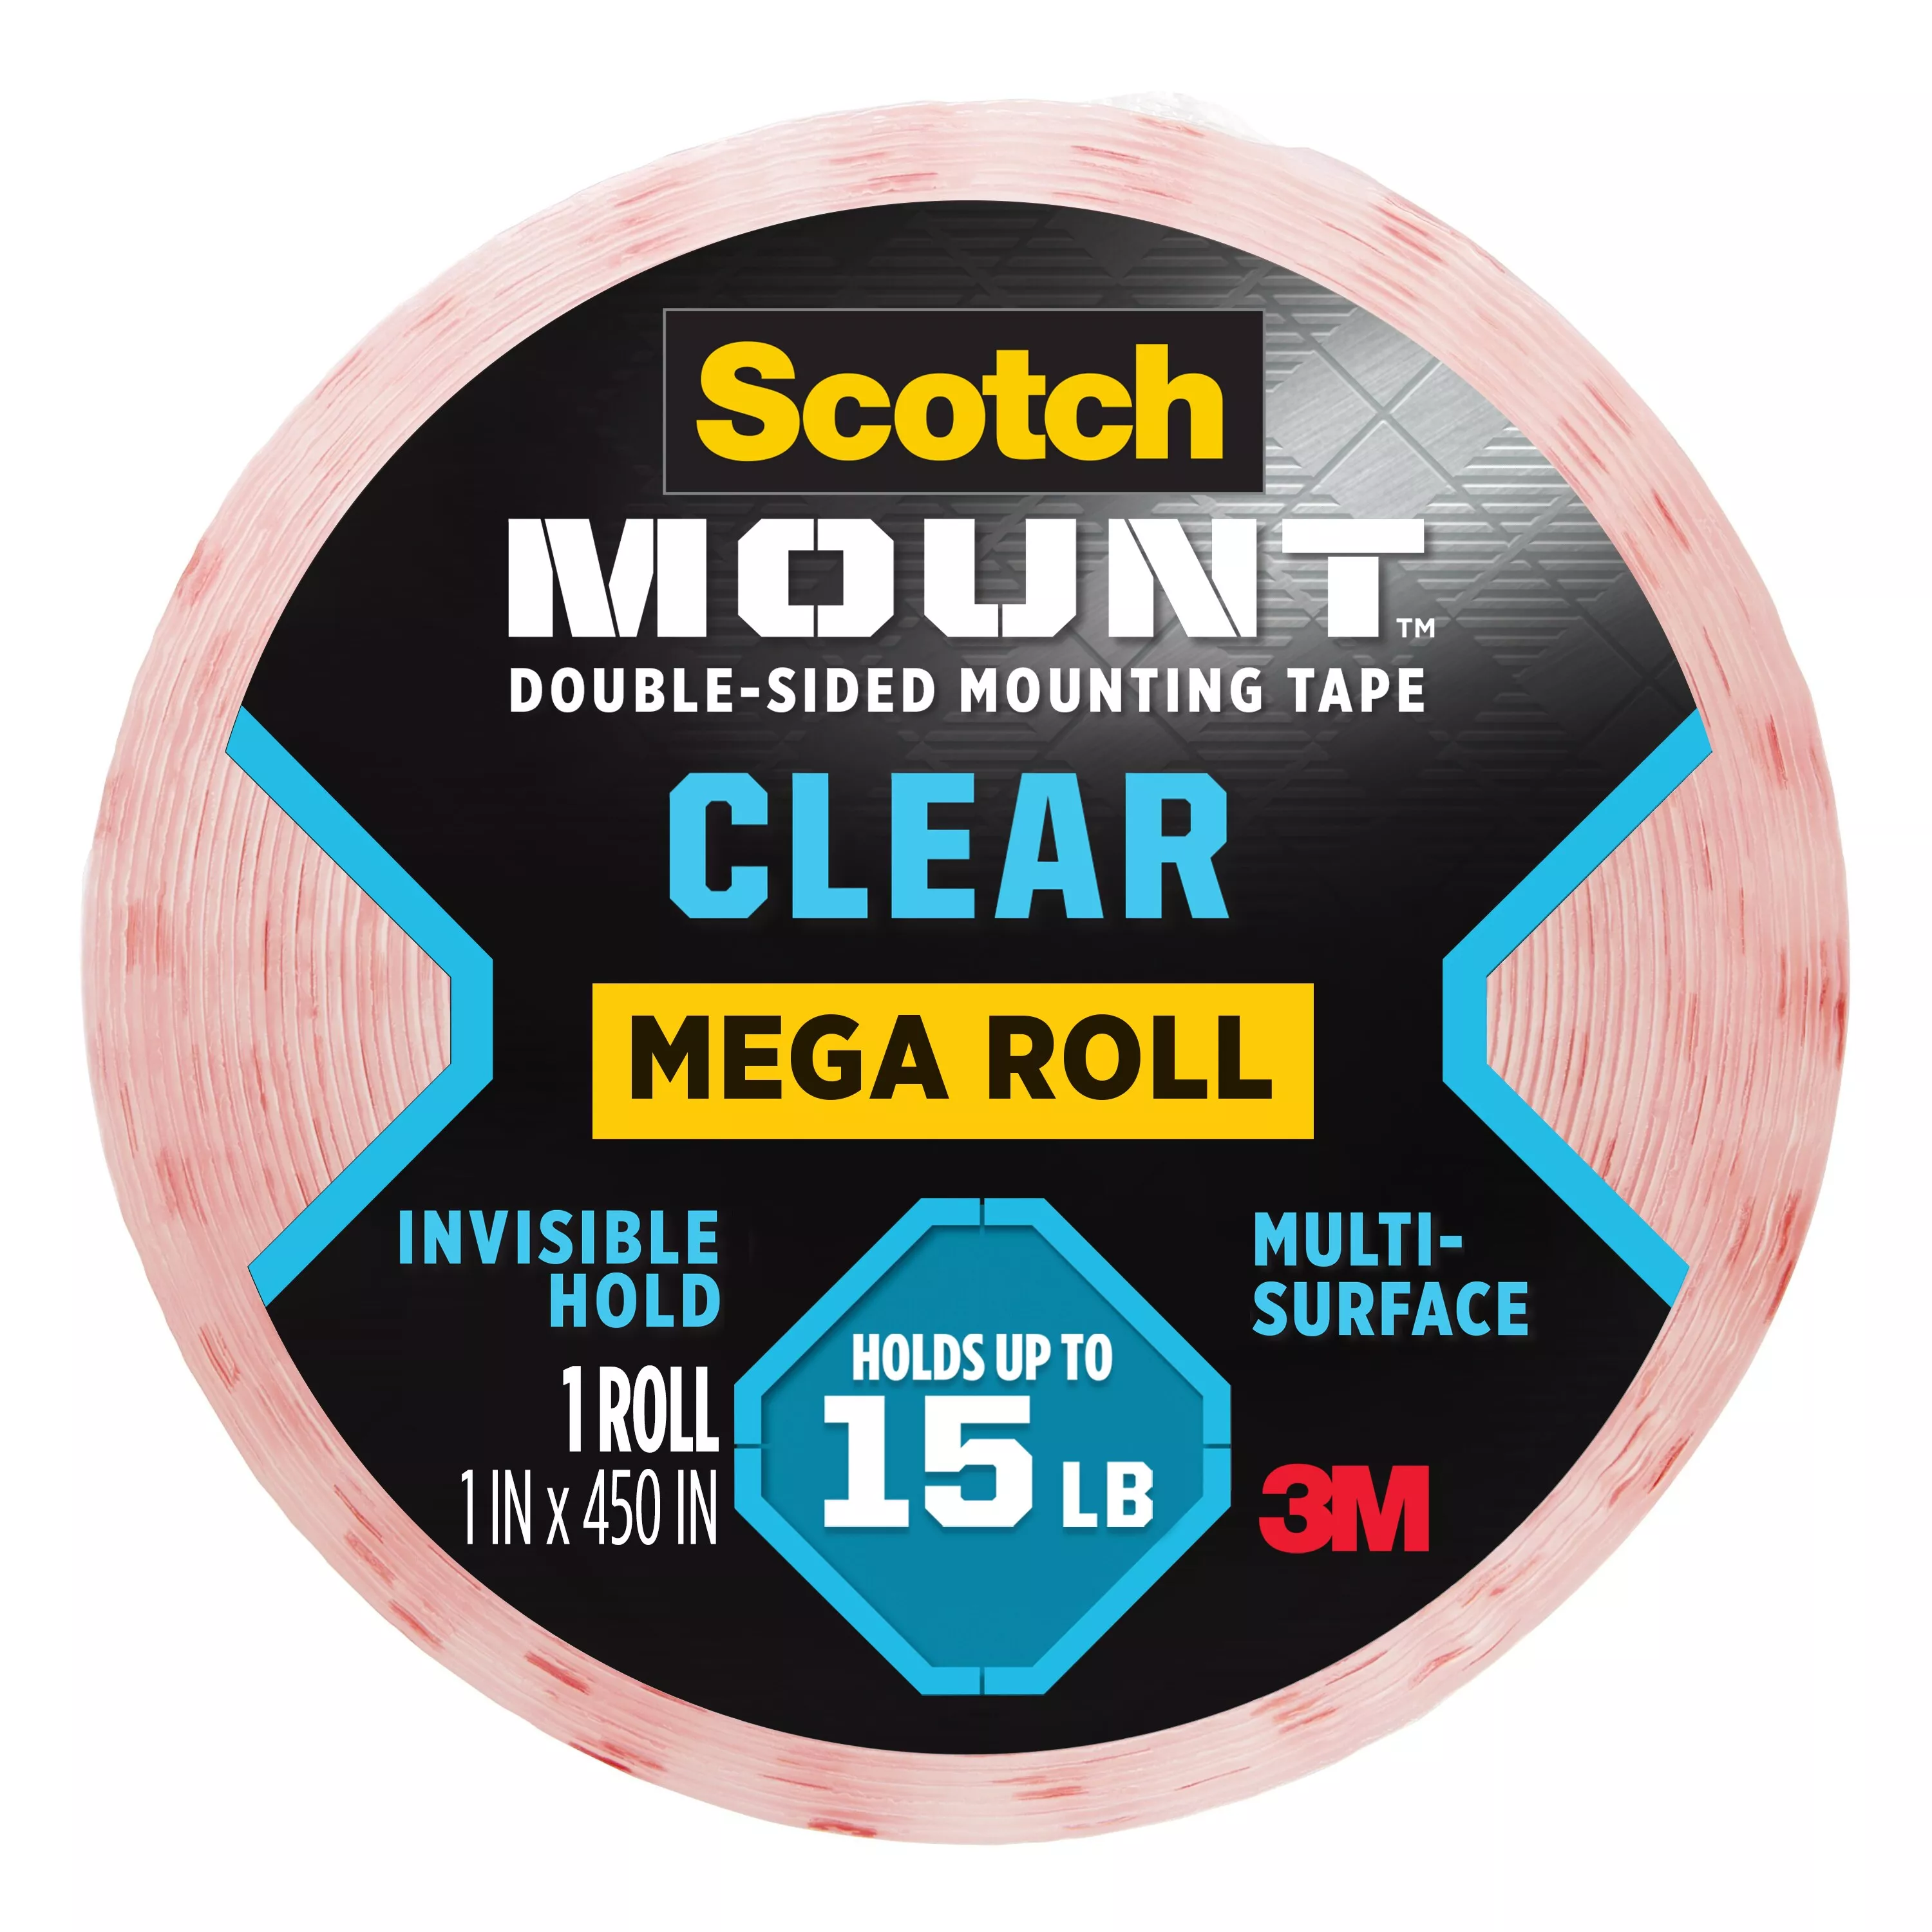 Scotch-Mount™ Clear Double-Sided Mounting Tape 410H-LONG-DC, 1 in x 450 in (2.54 cm x 11.4 m)